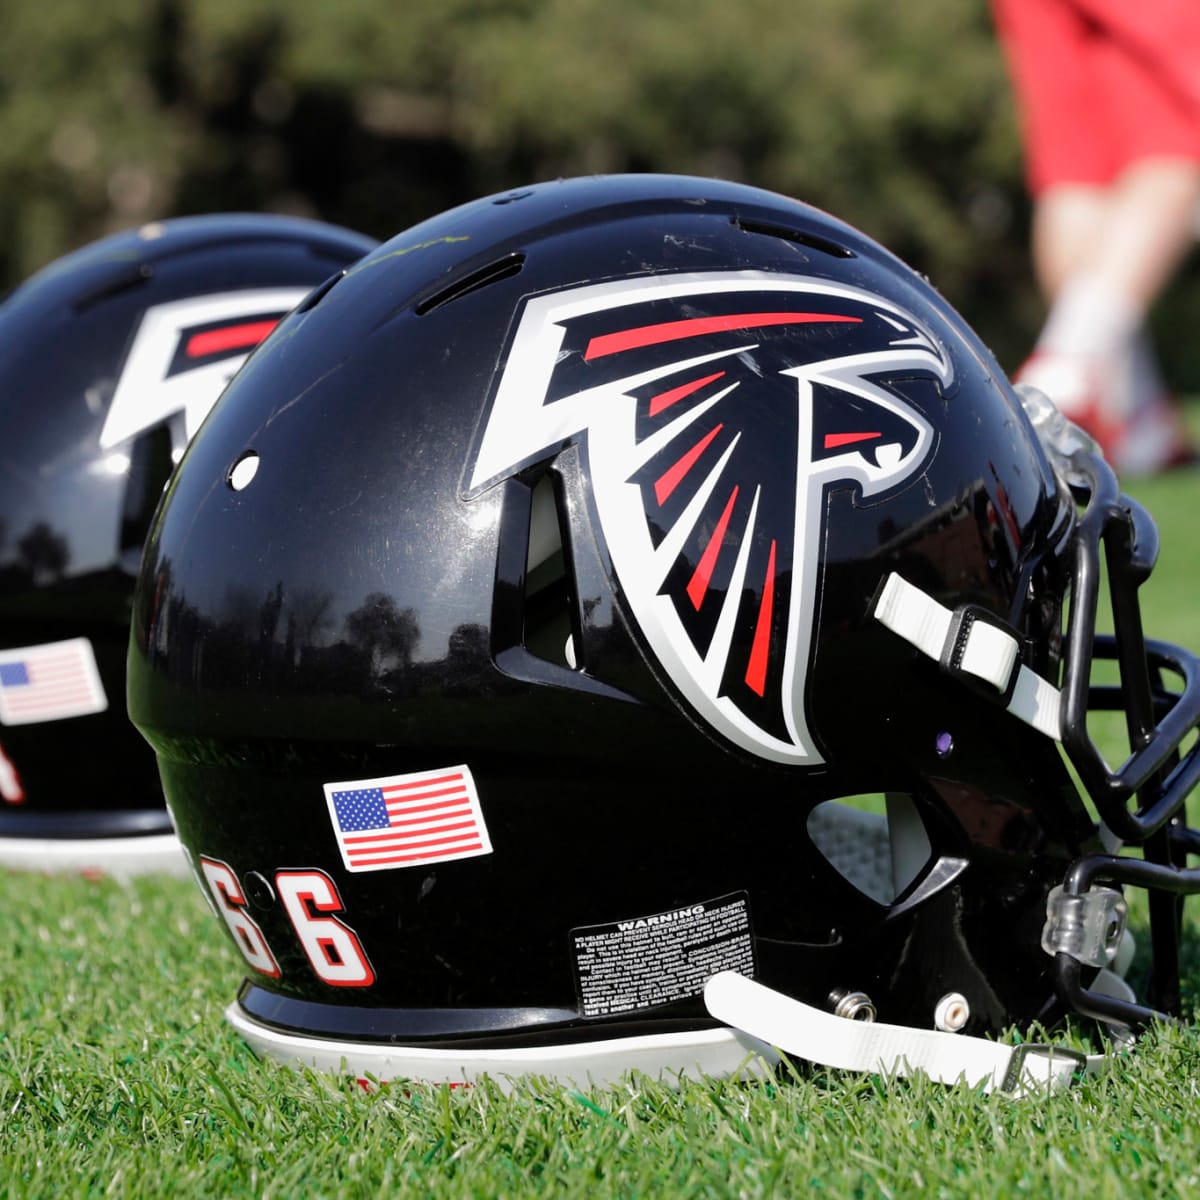 Opinion: Falcons should permanently adopt throwback uniforms